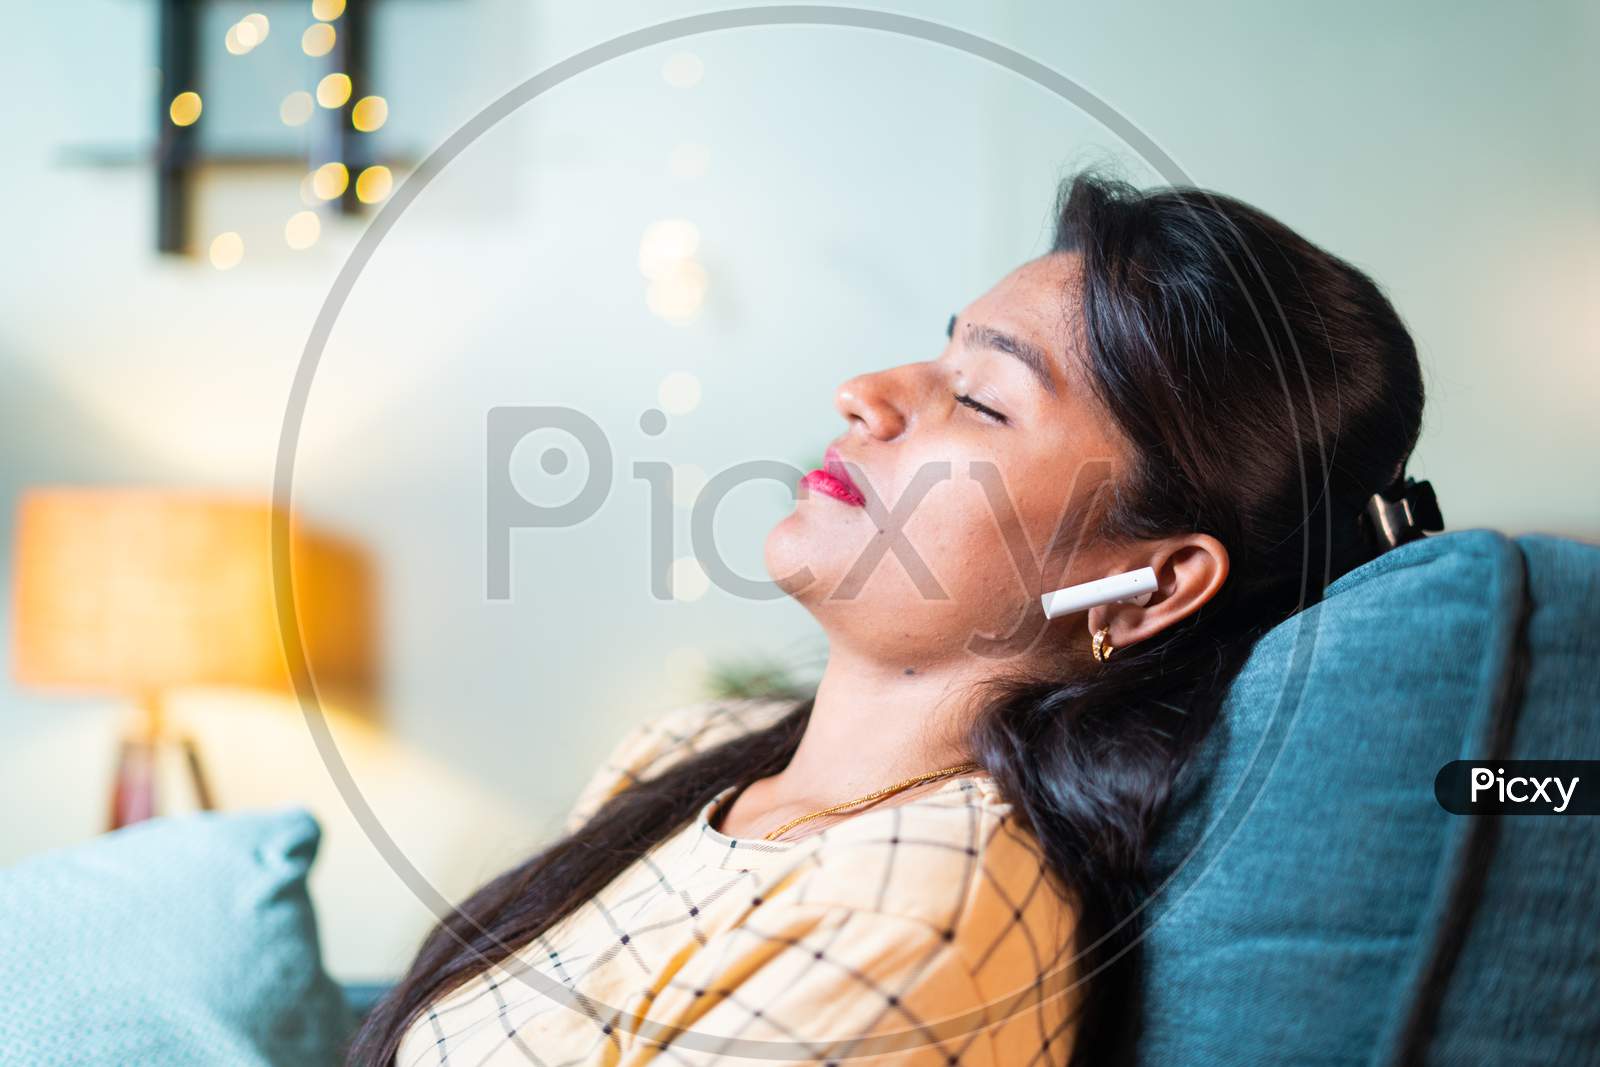 Young Girl With Closed Eyes Resting By Leaning On Sofa By Listening Favourite Song On Wireless Headphone In Living Room - Concept Of Taking Break,Relaxaing Or Spending Free Time By Enjoying Music